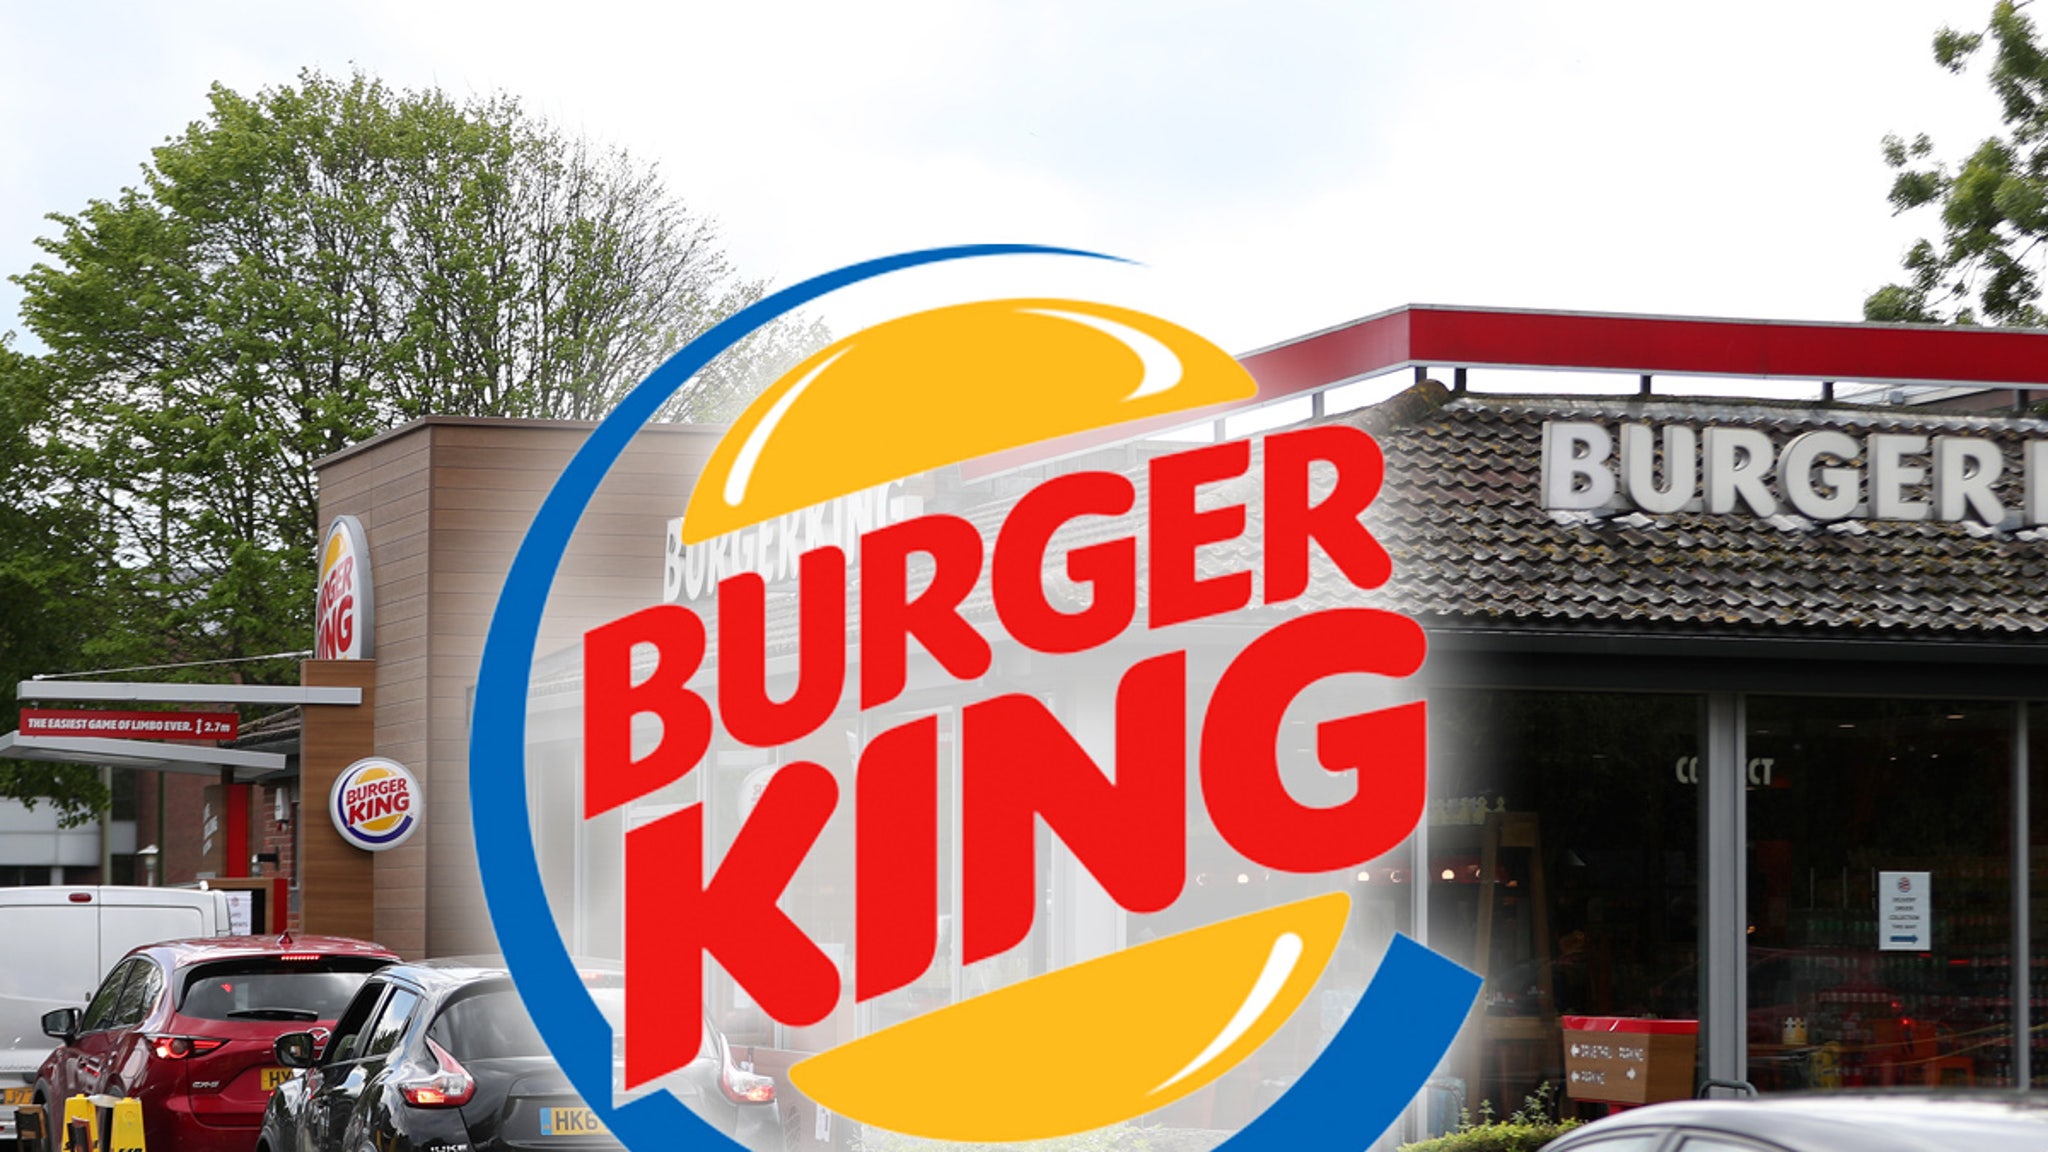 Burger King says women belong in the kitchen, sexist culinary campaign